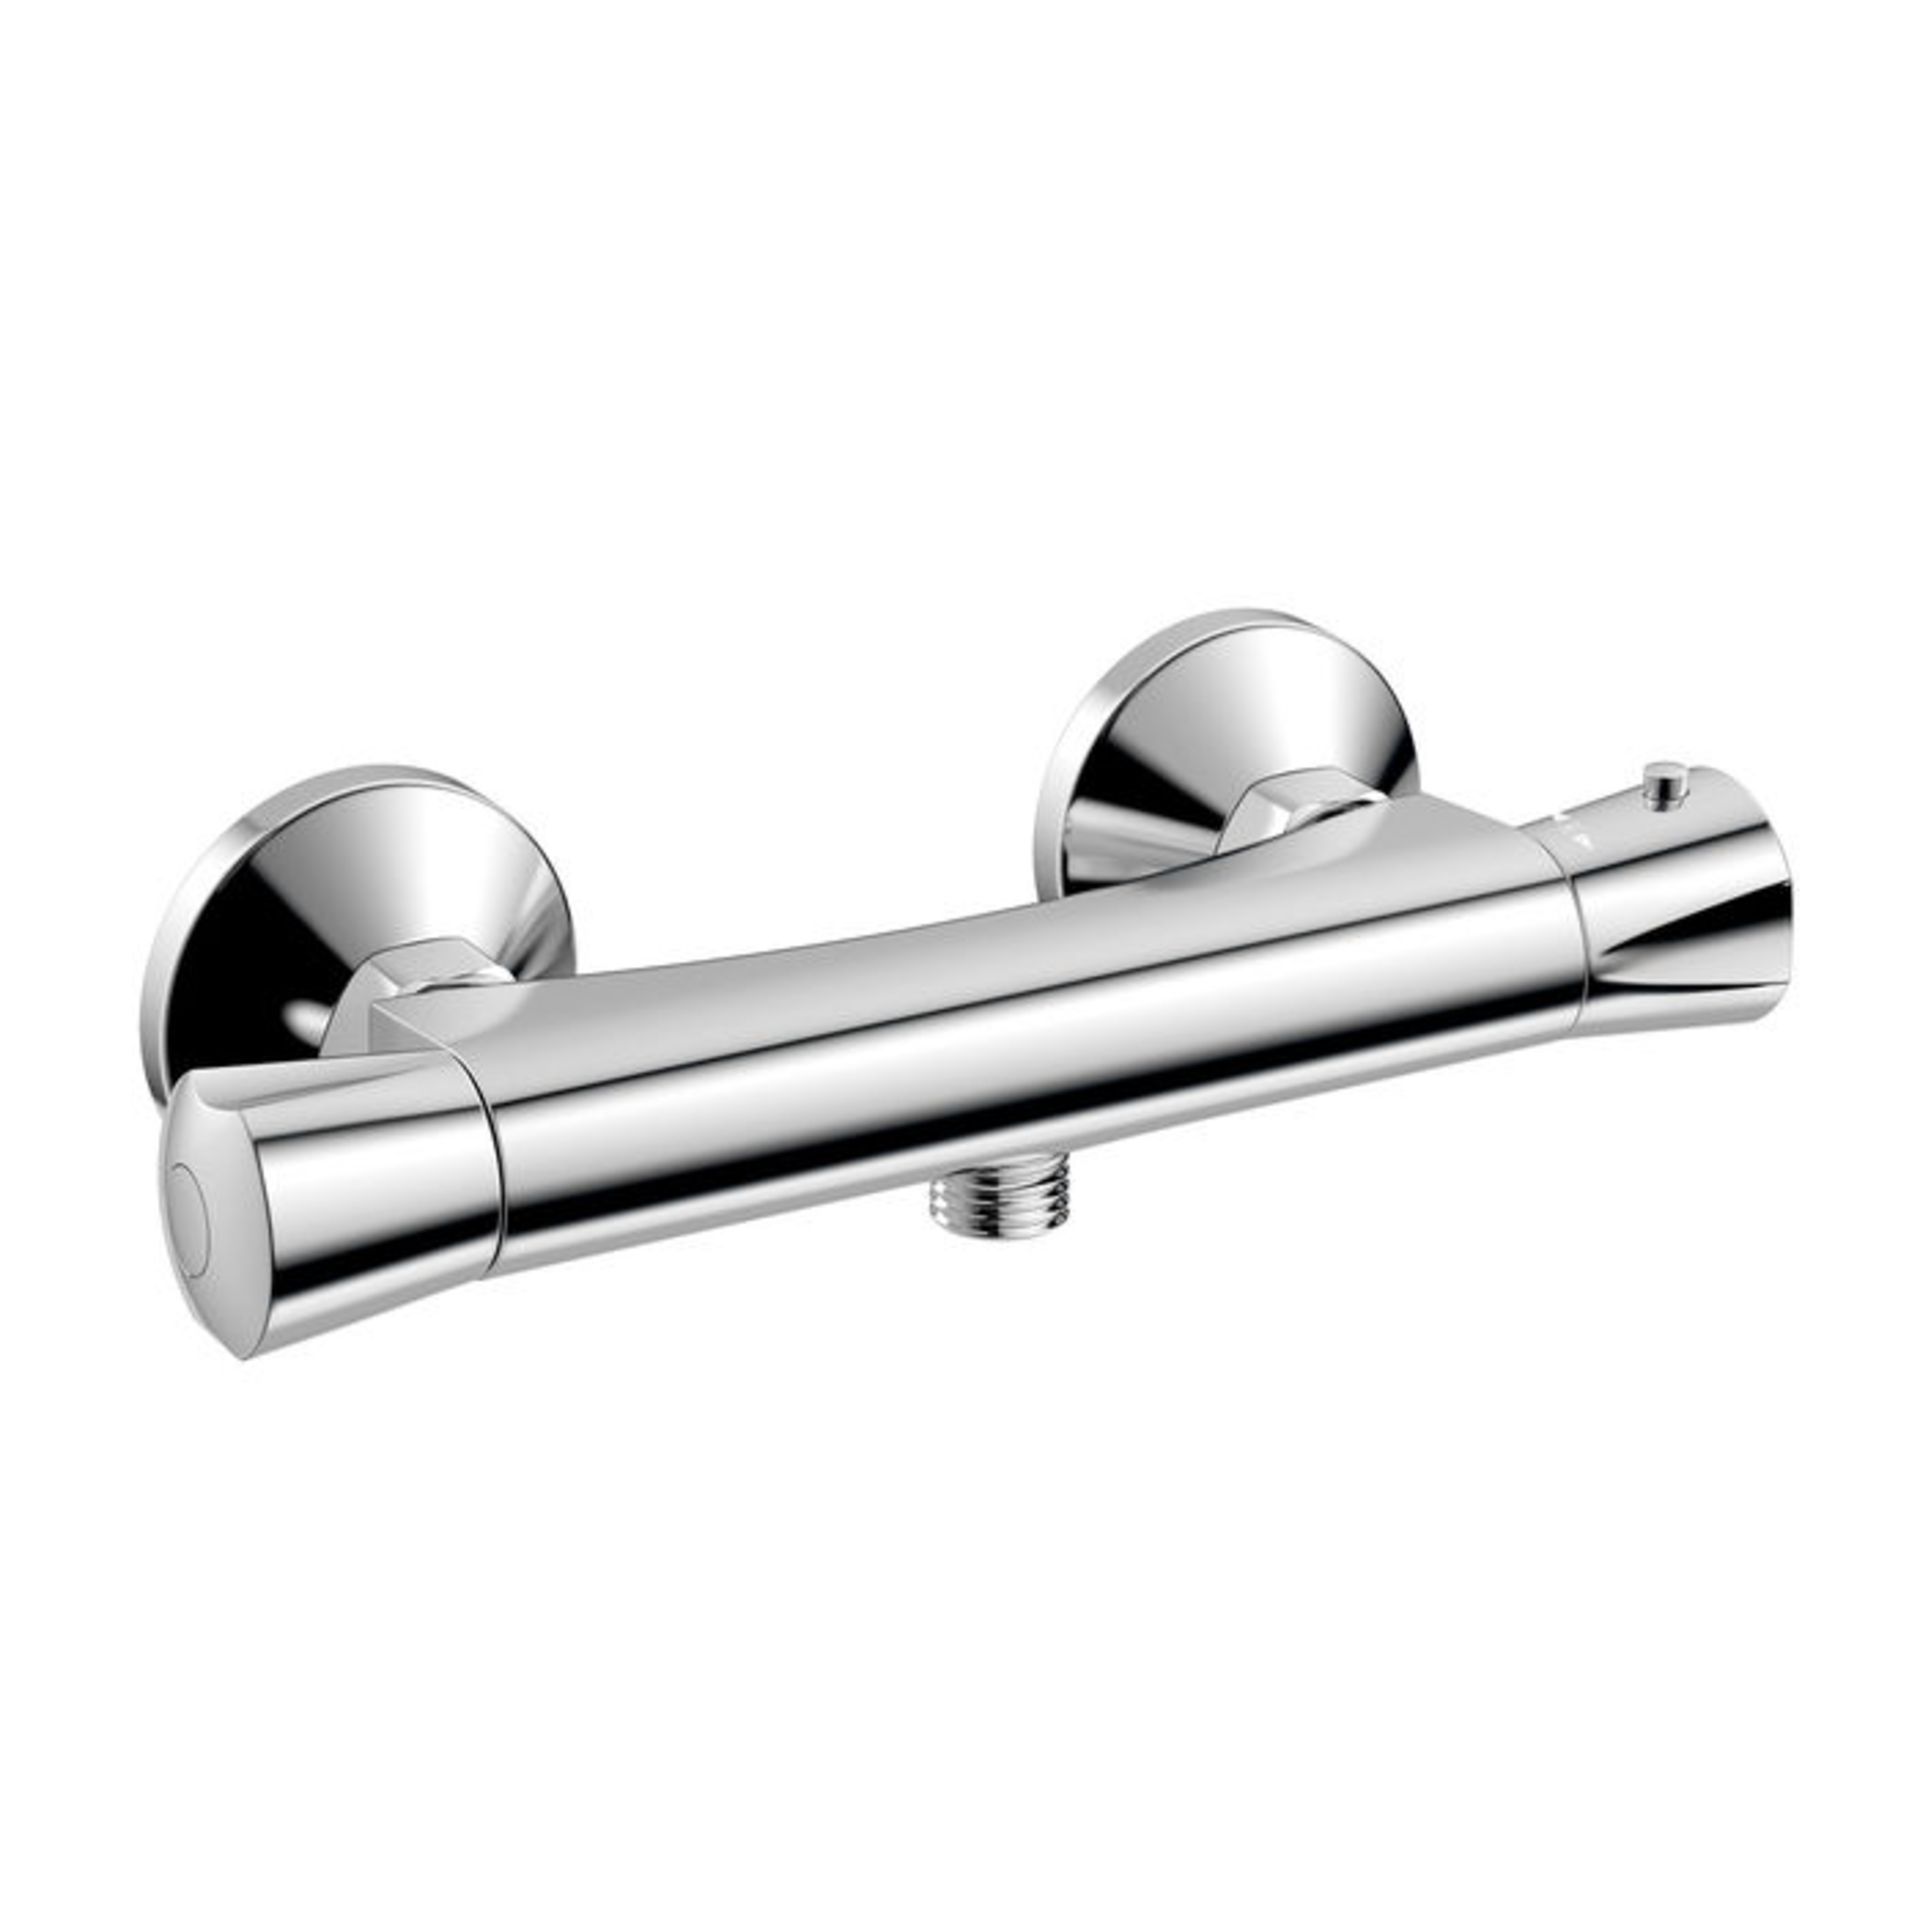 (G7) Thermostatic Shower Valve - Round Bar Mixer Chrome plated solid brass mixer Cool to Touch - Image 2 of 2